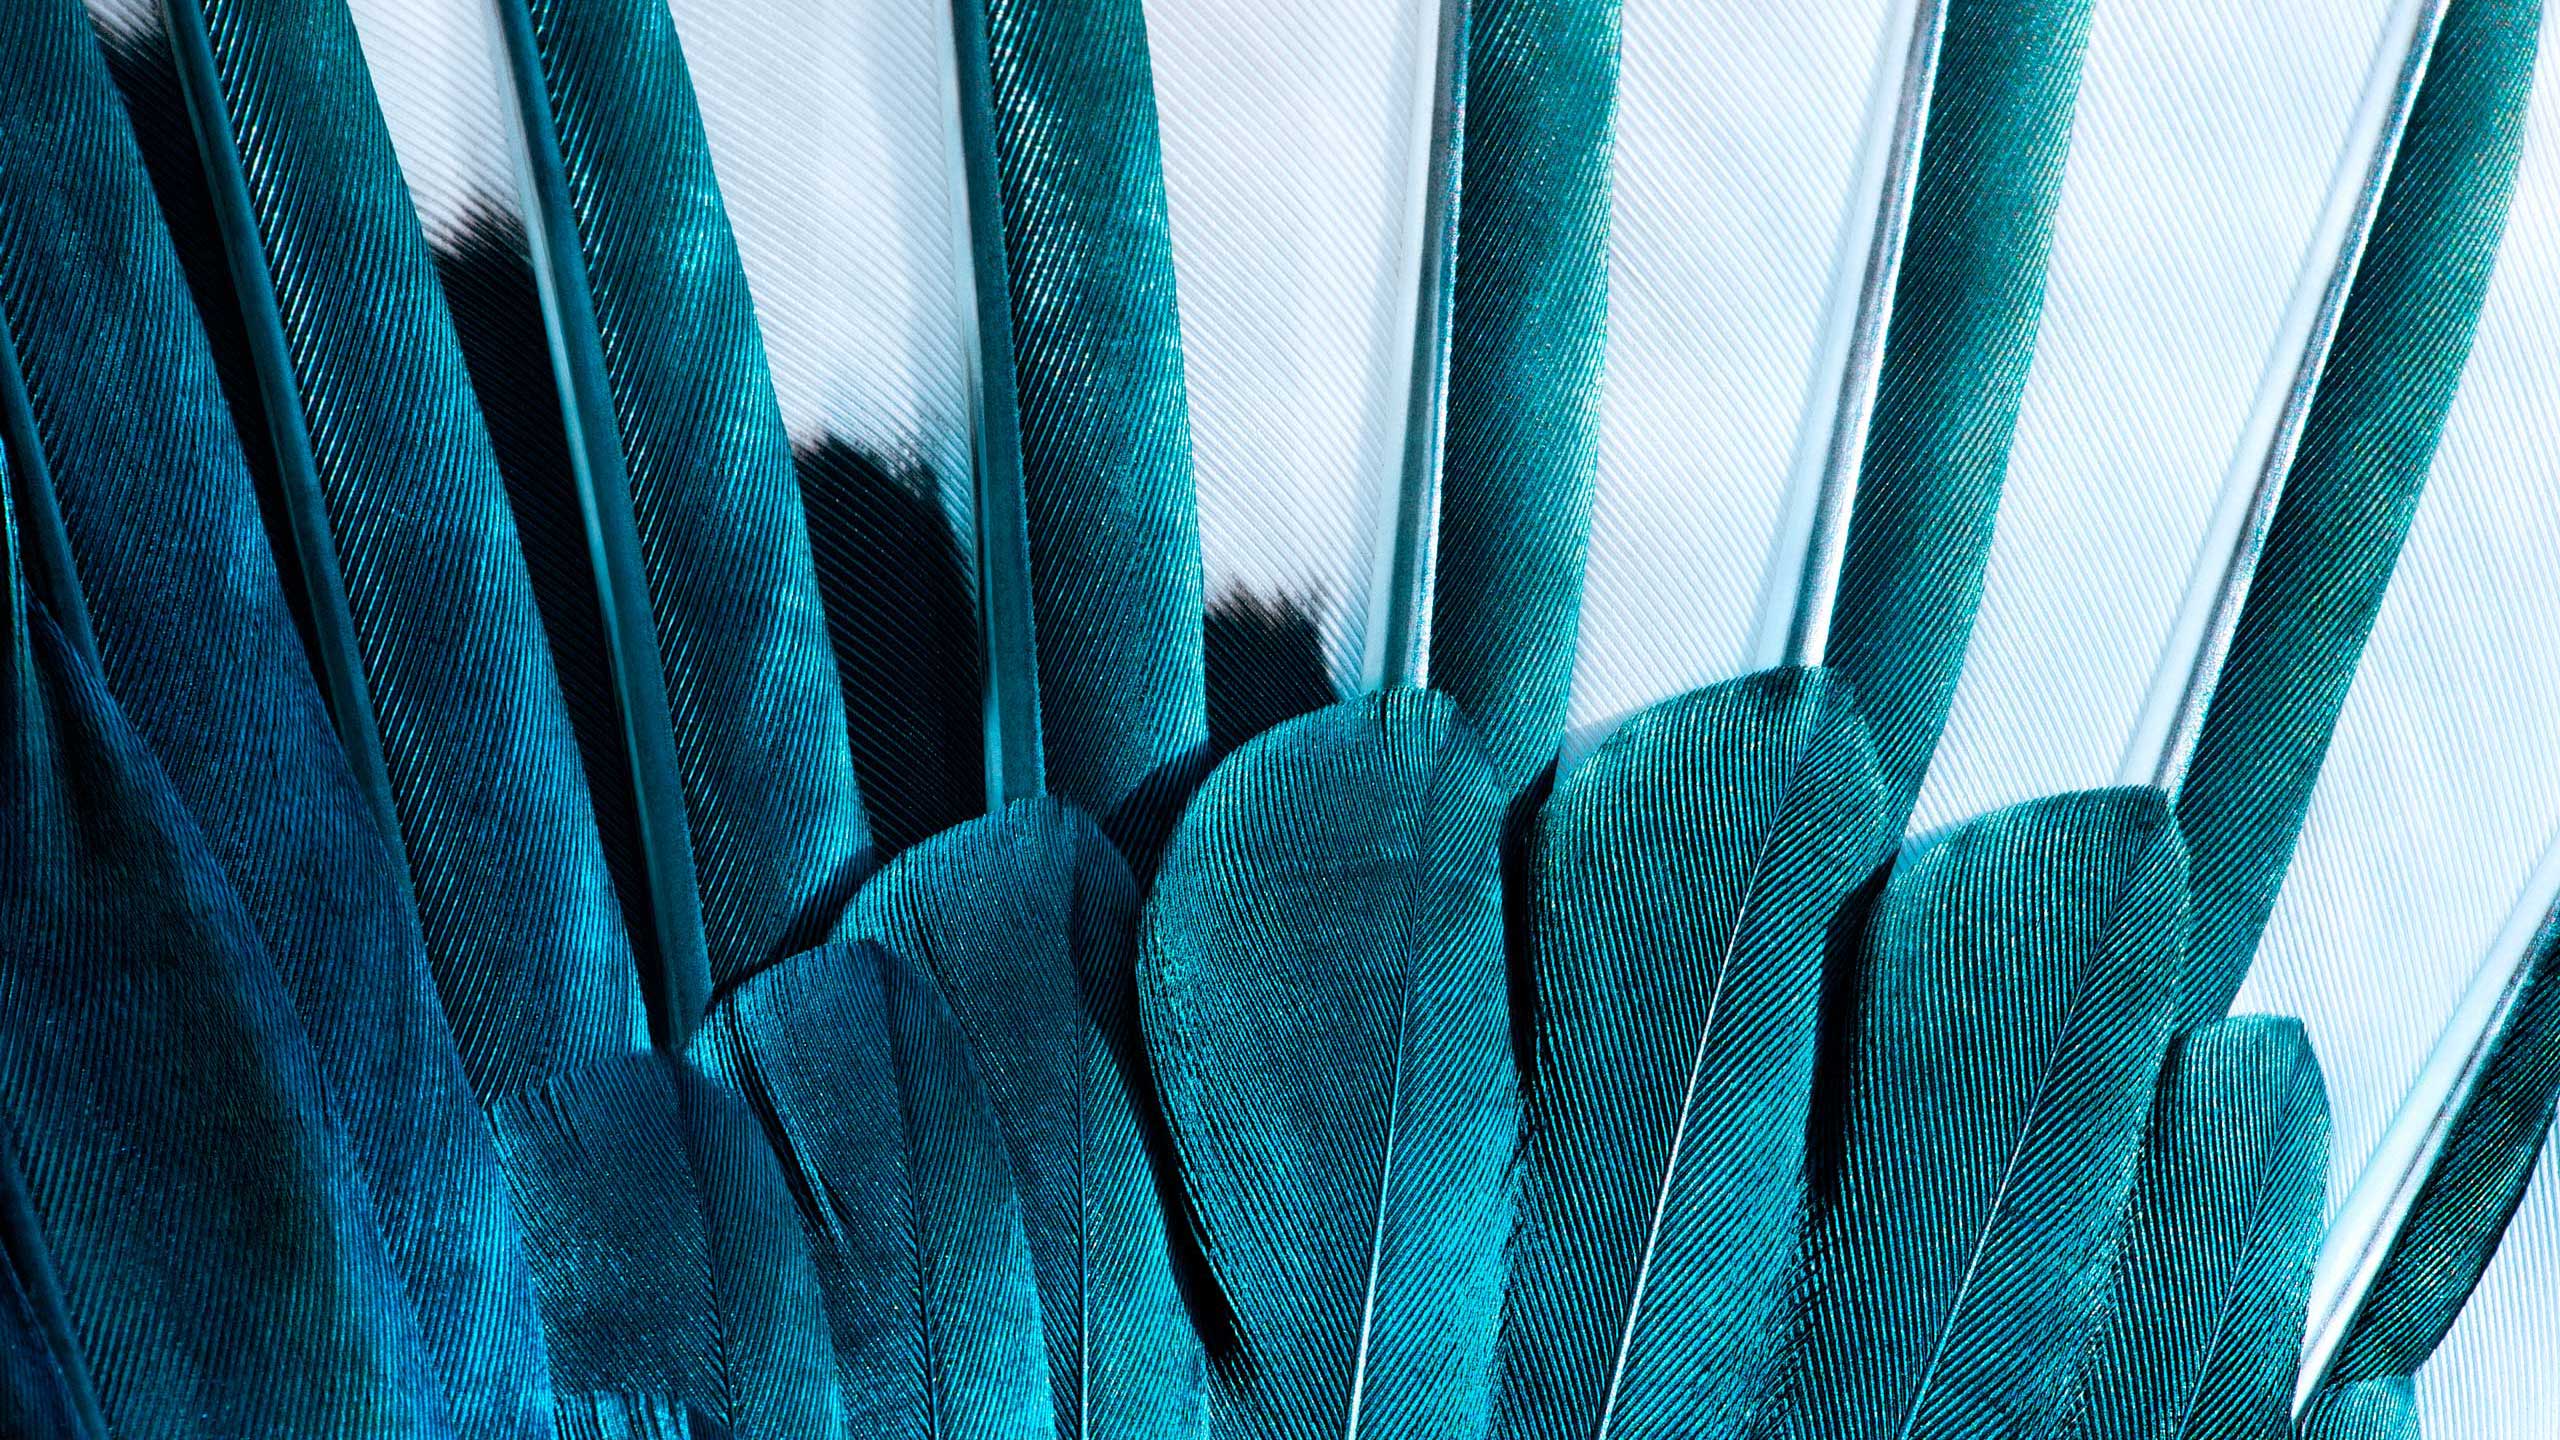 Will_Works_Feathers02